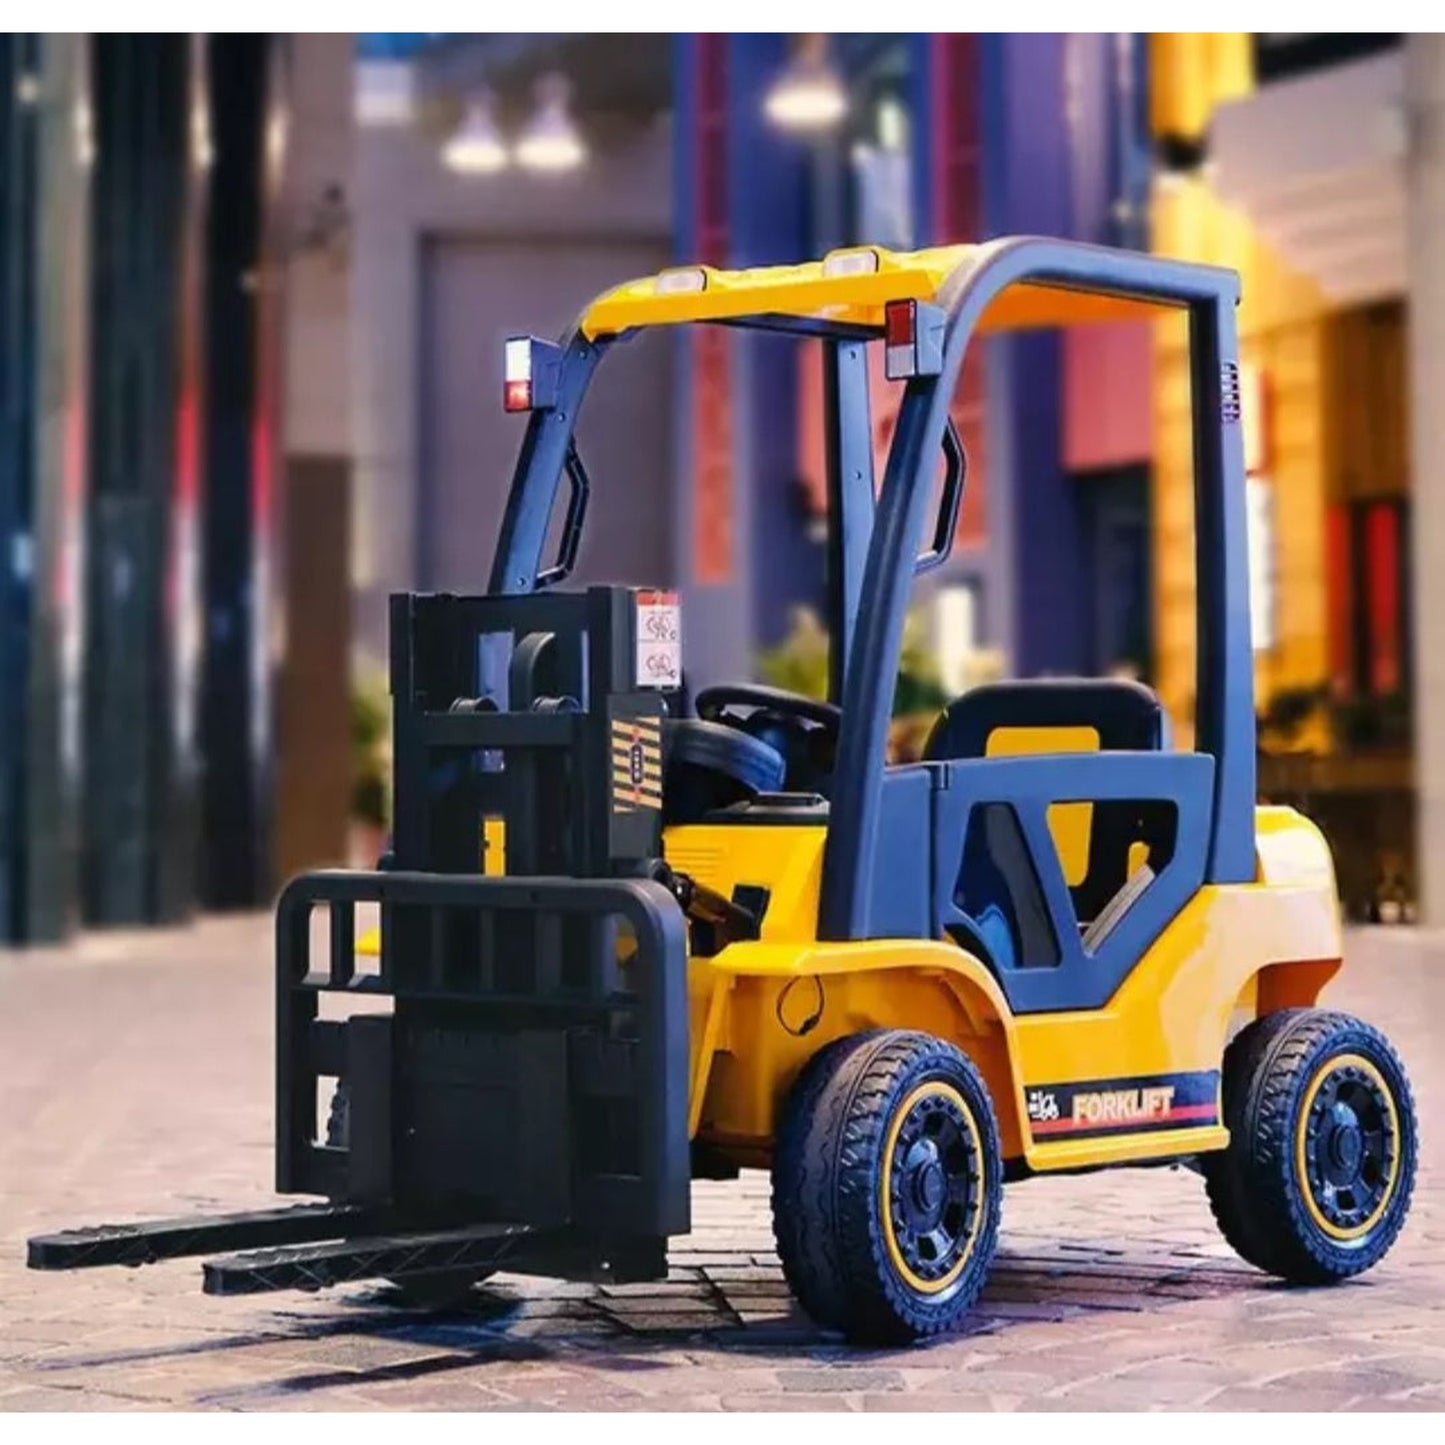 Kids Ride On Fork Lift MP4 Video Player Leather Seats, Rubber Tyres, Parental Remote